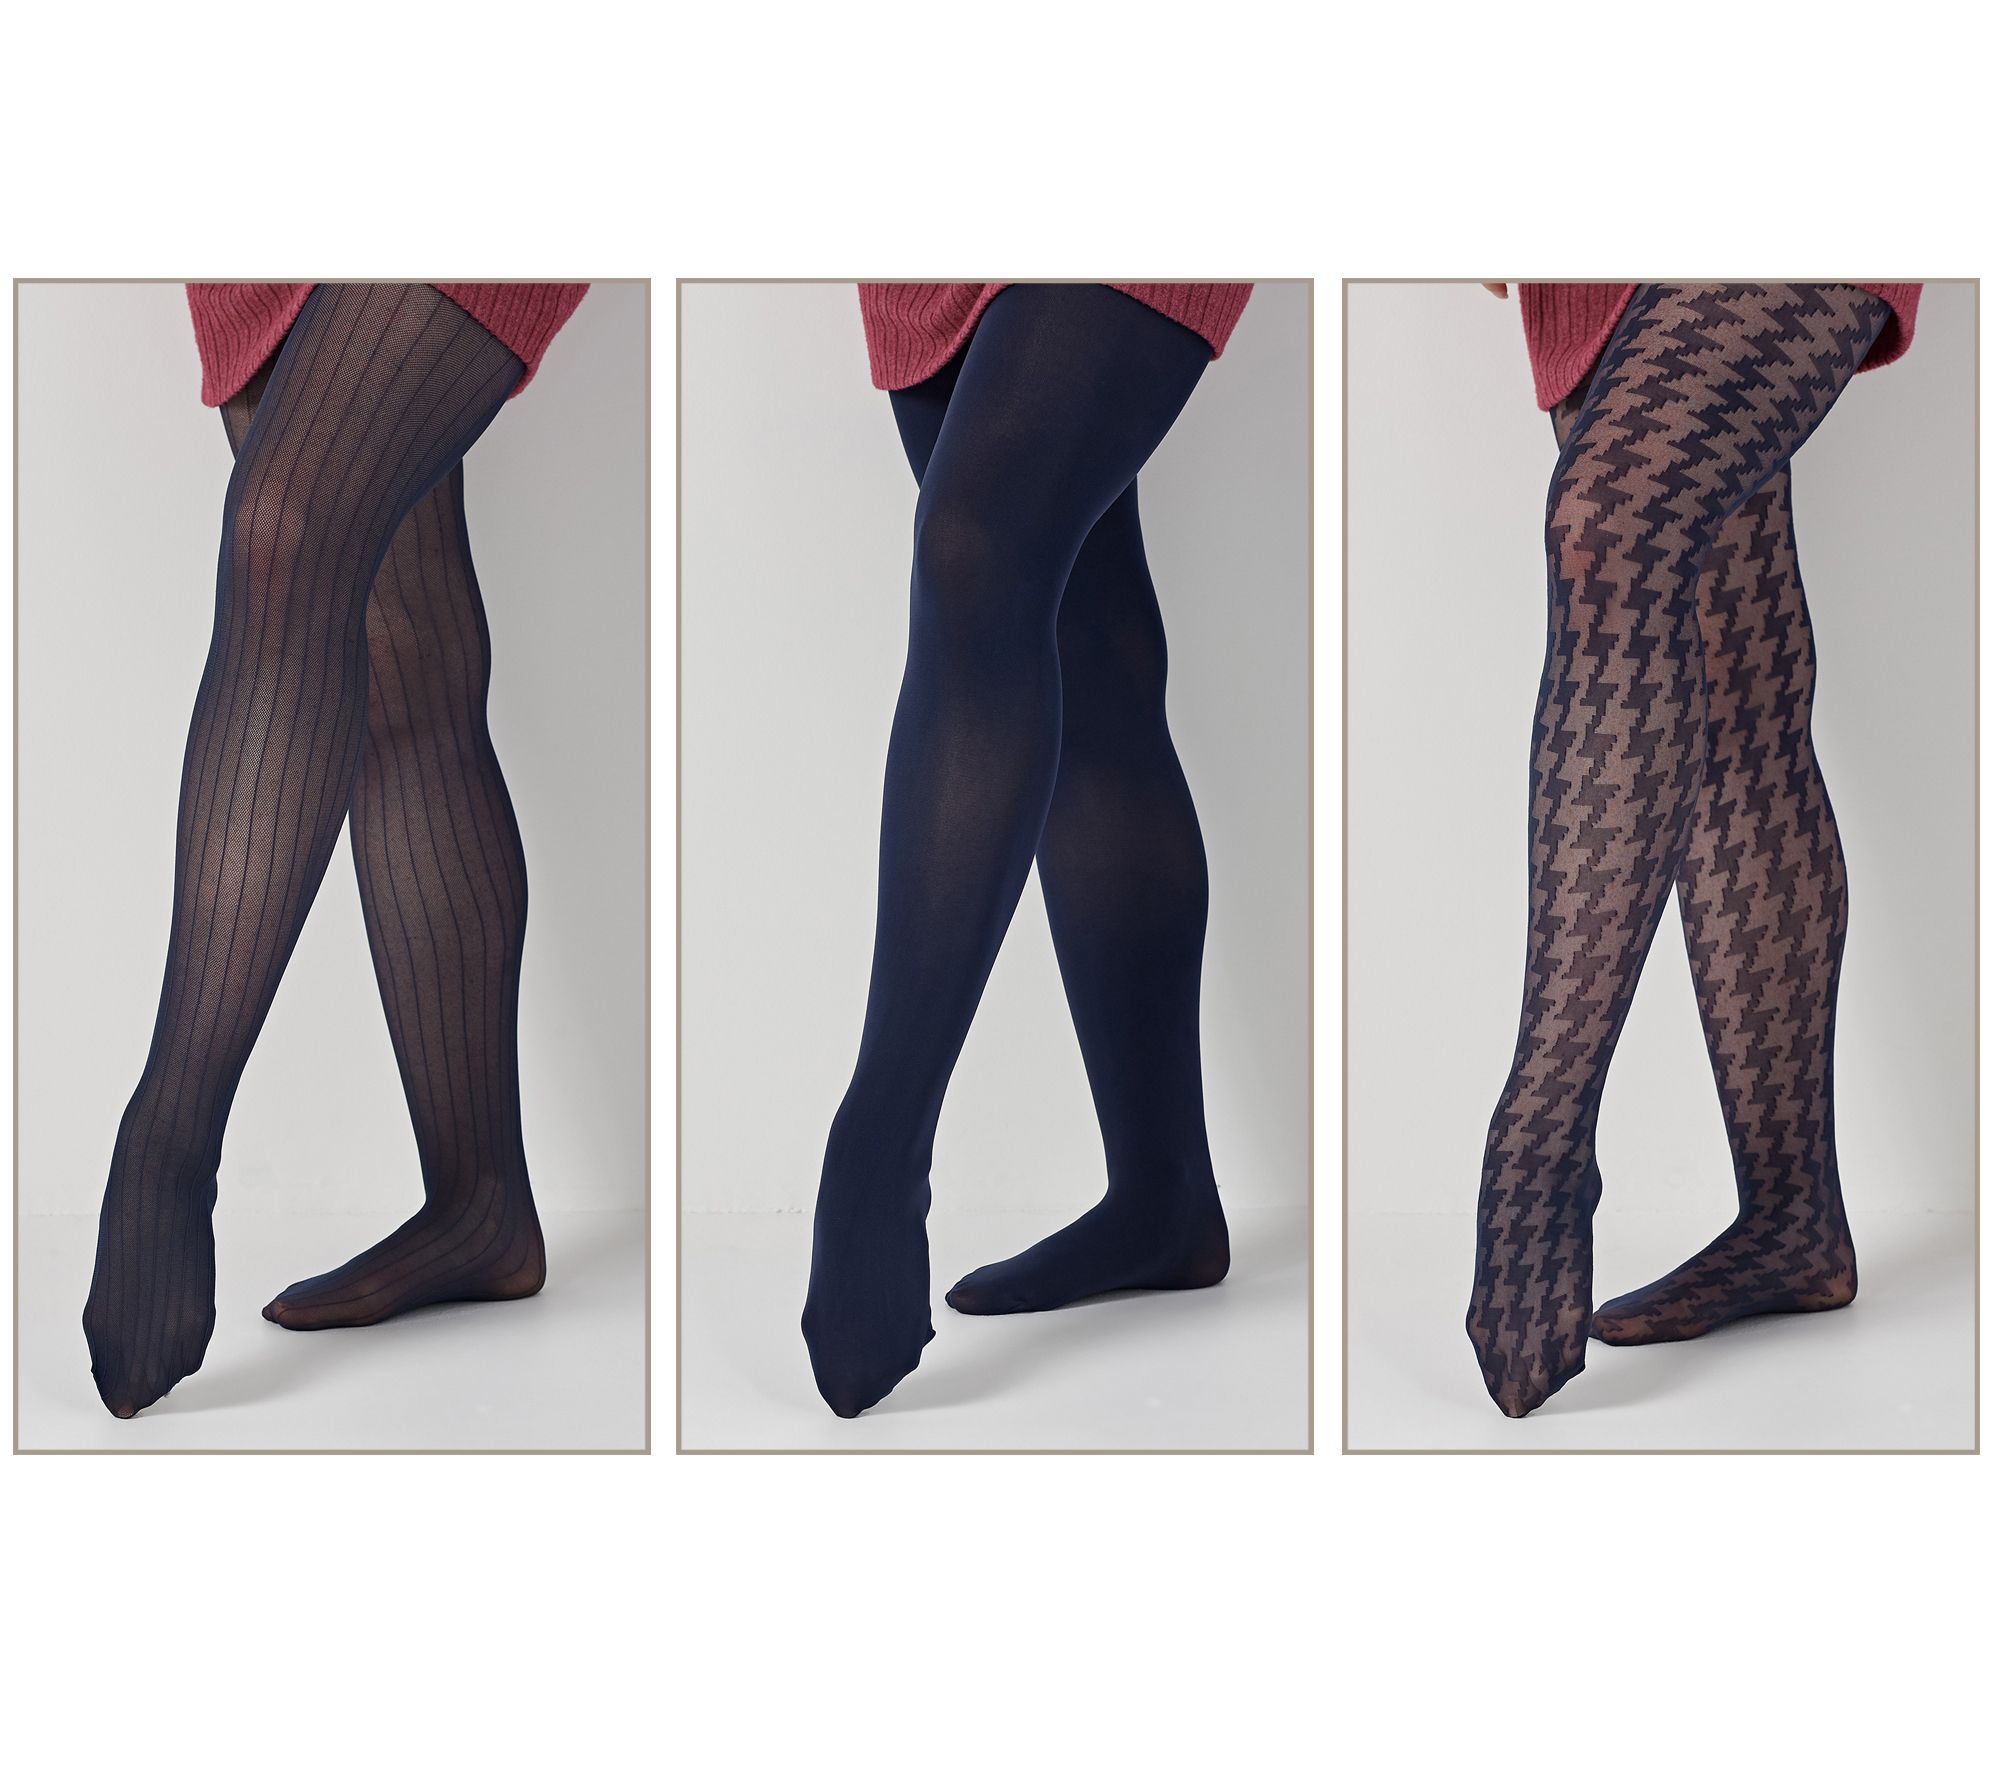 As Is Legacy Control Top Tights Set of 3 